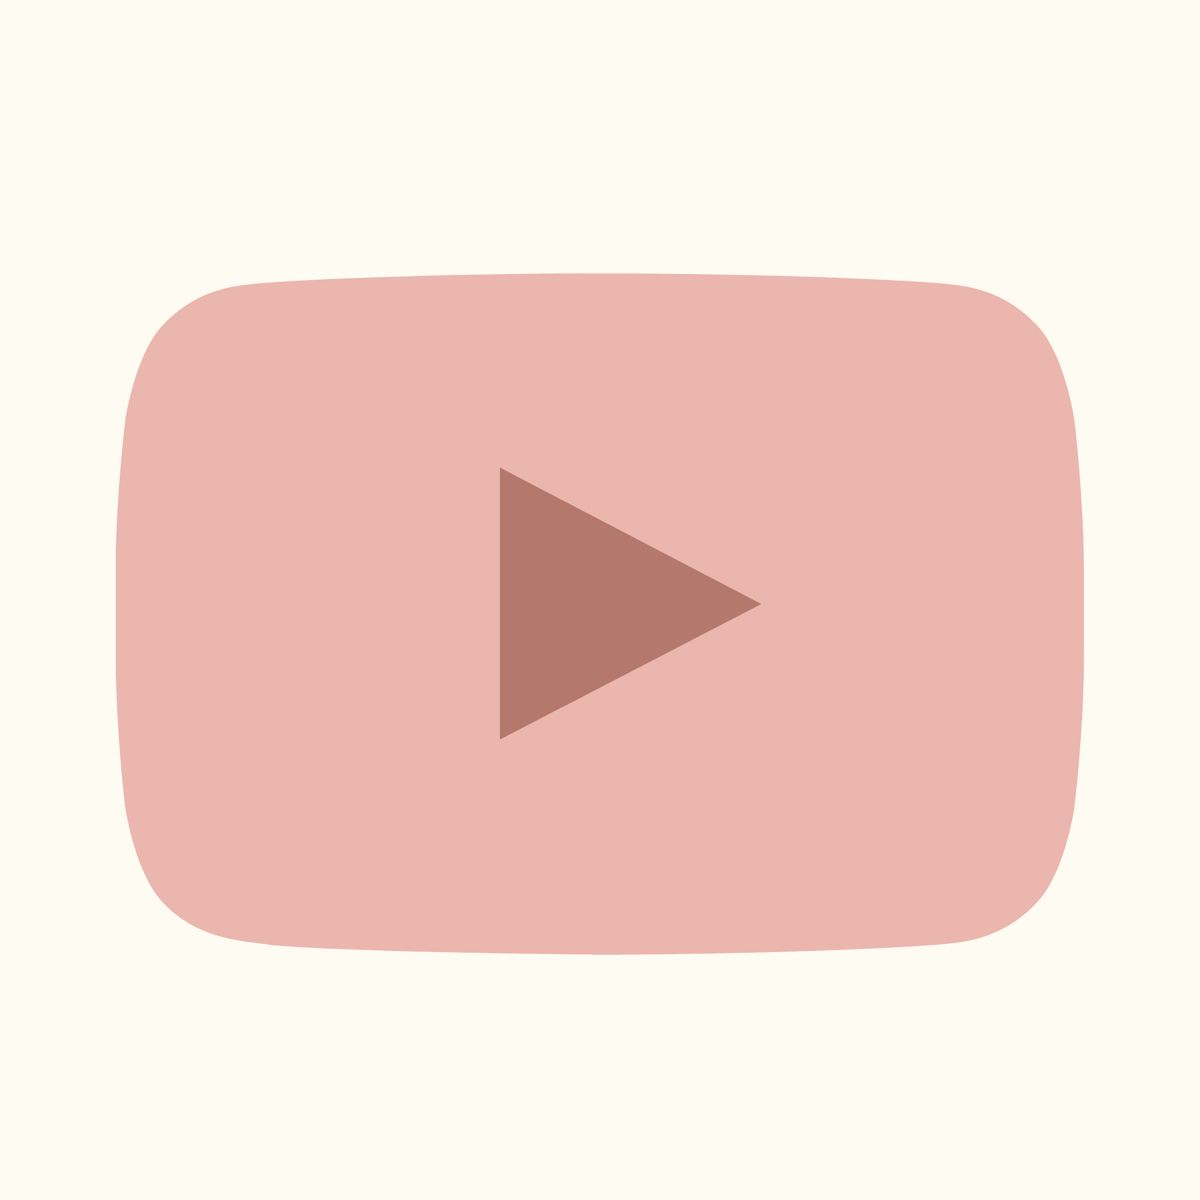 A pink youtube icon with the play button - YouTube